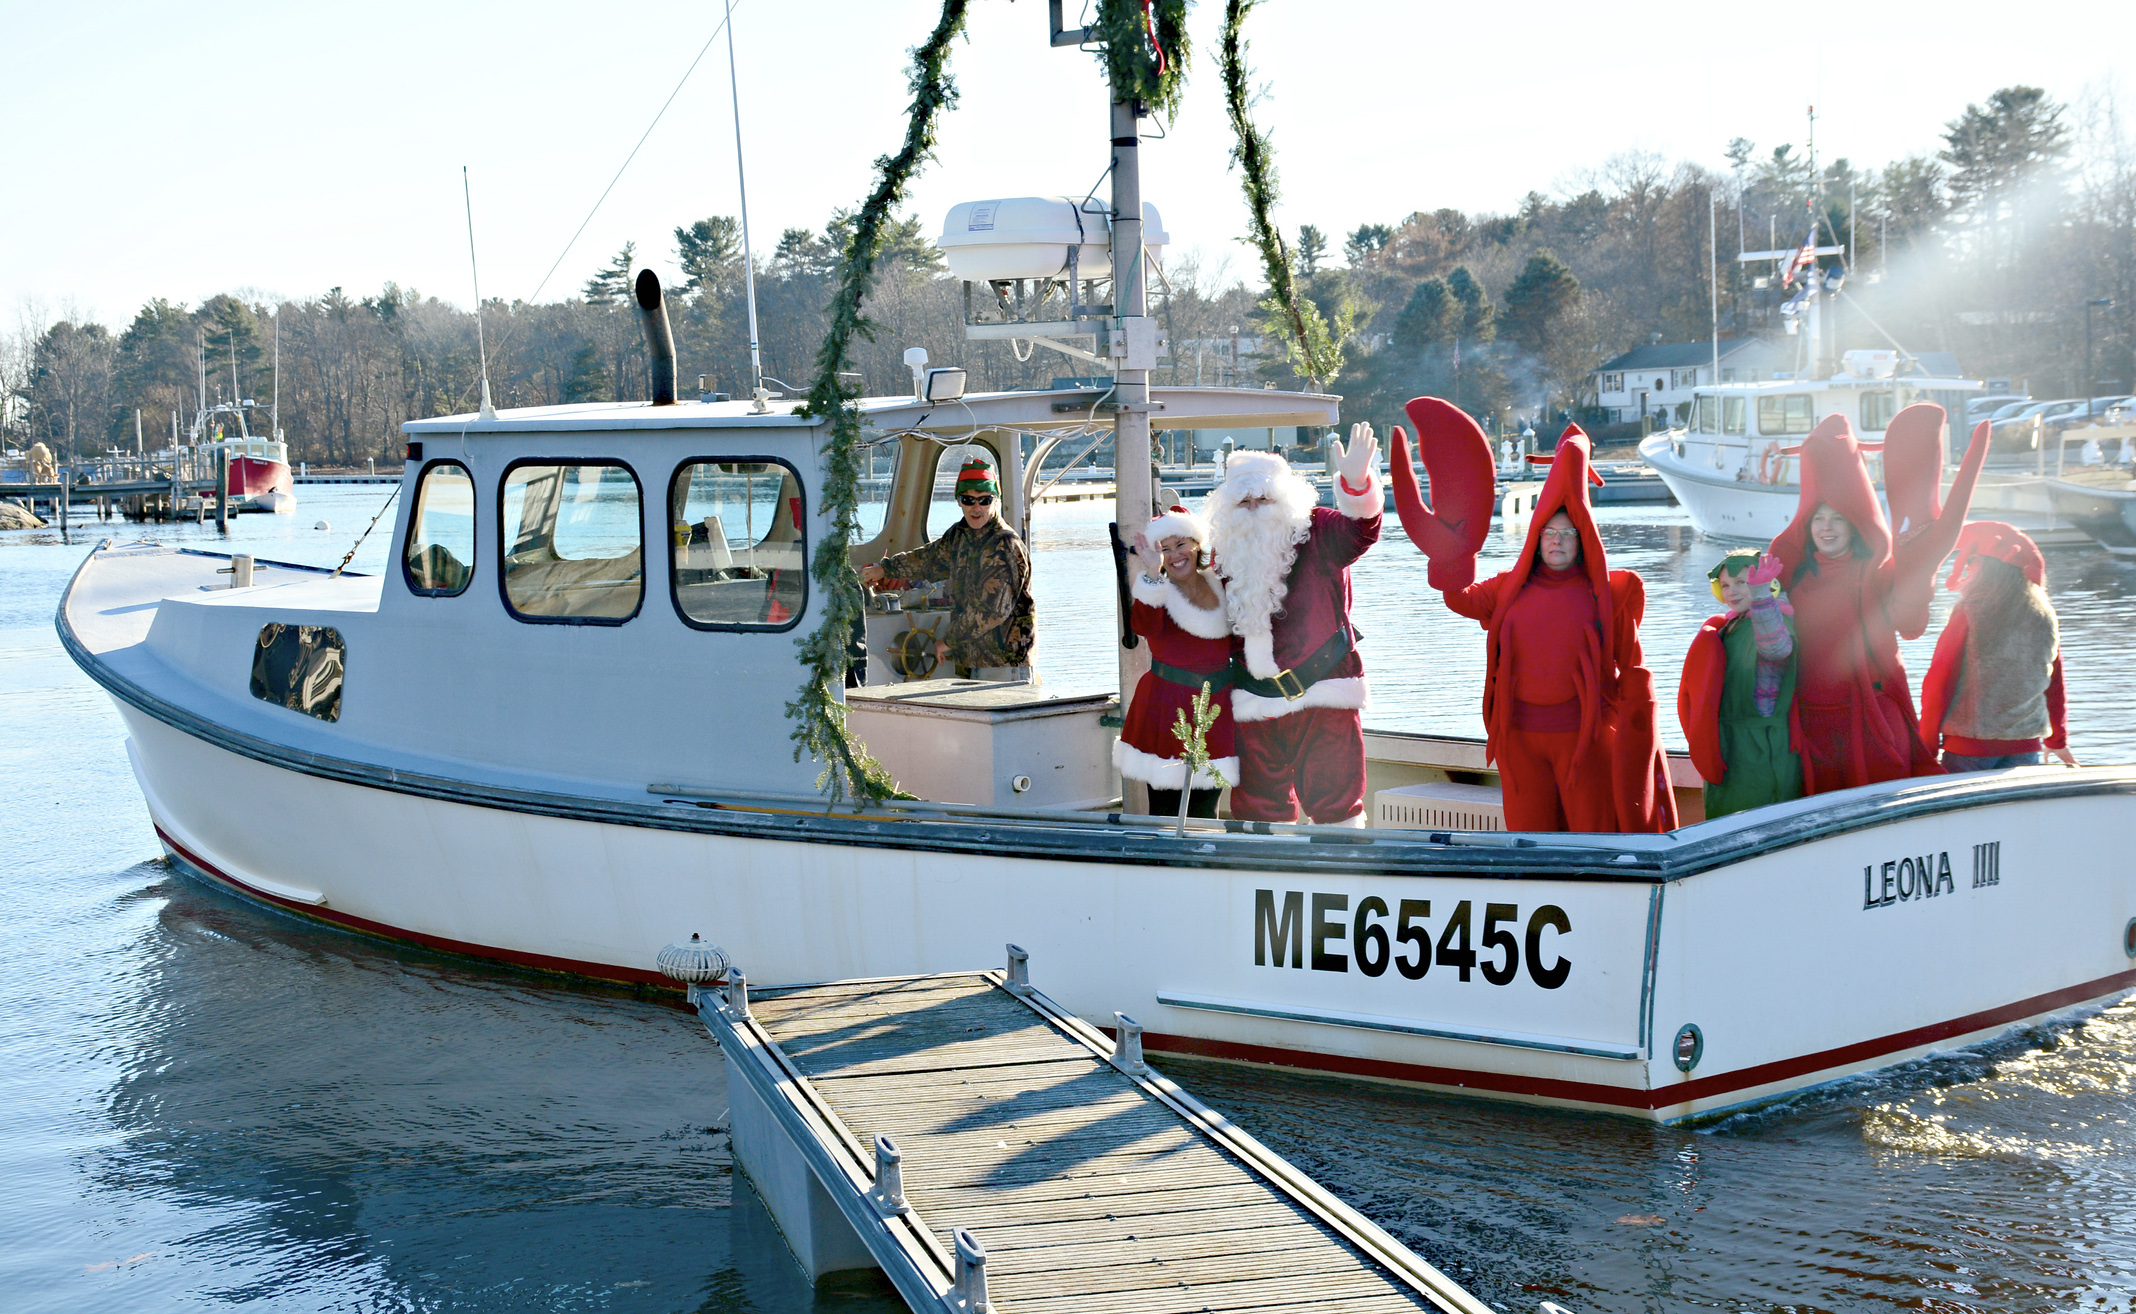 Santa arrives by Lobster Boat - Christmas Prelude